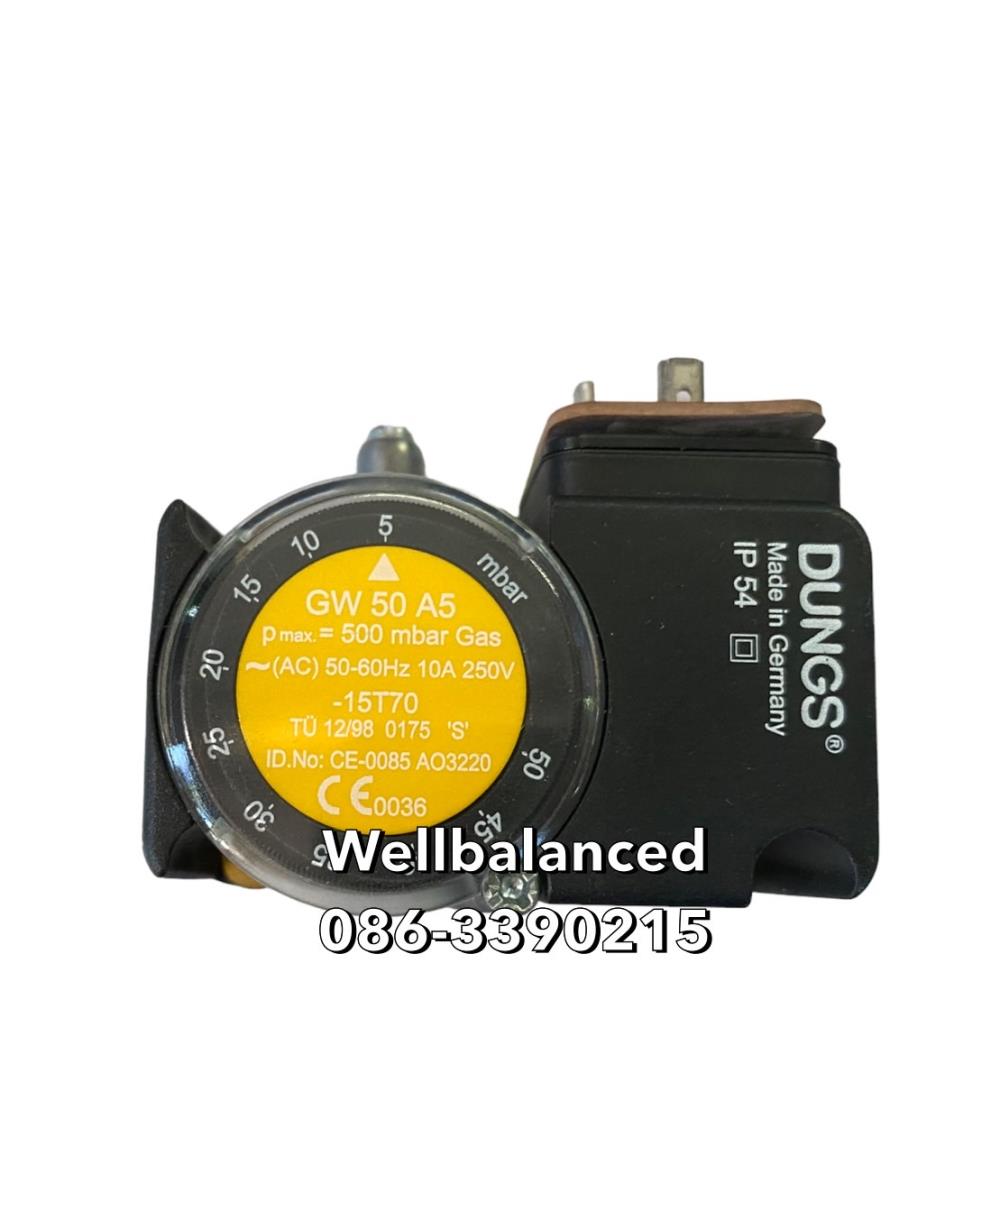 " DUNGS " Pressure Switch Model : GW 50 A5," DUNGS " Pressure Switch Model : GW 50 A5," DUNGS " Pressure Switch Model : GW 50 A5,Instruments and Controls/Switches